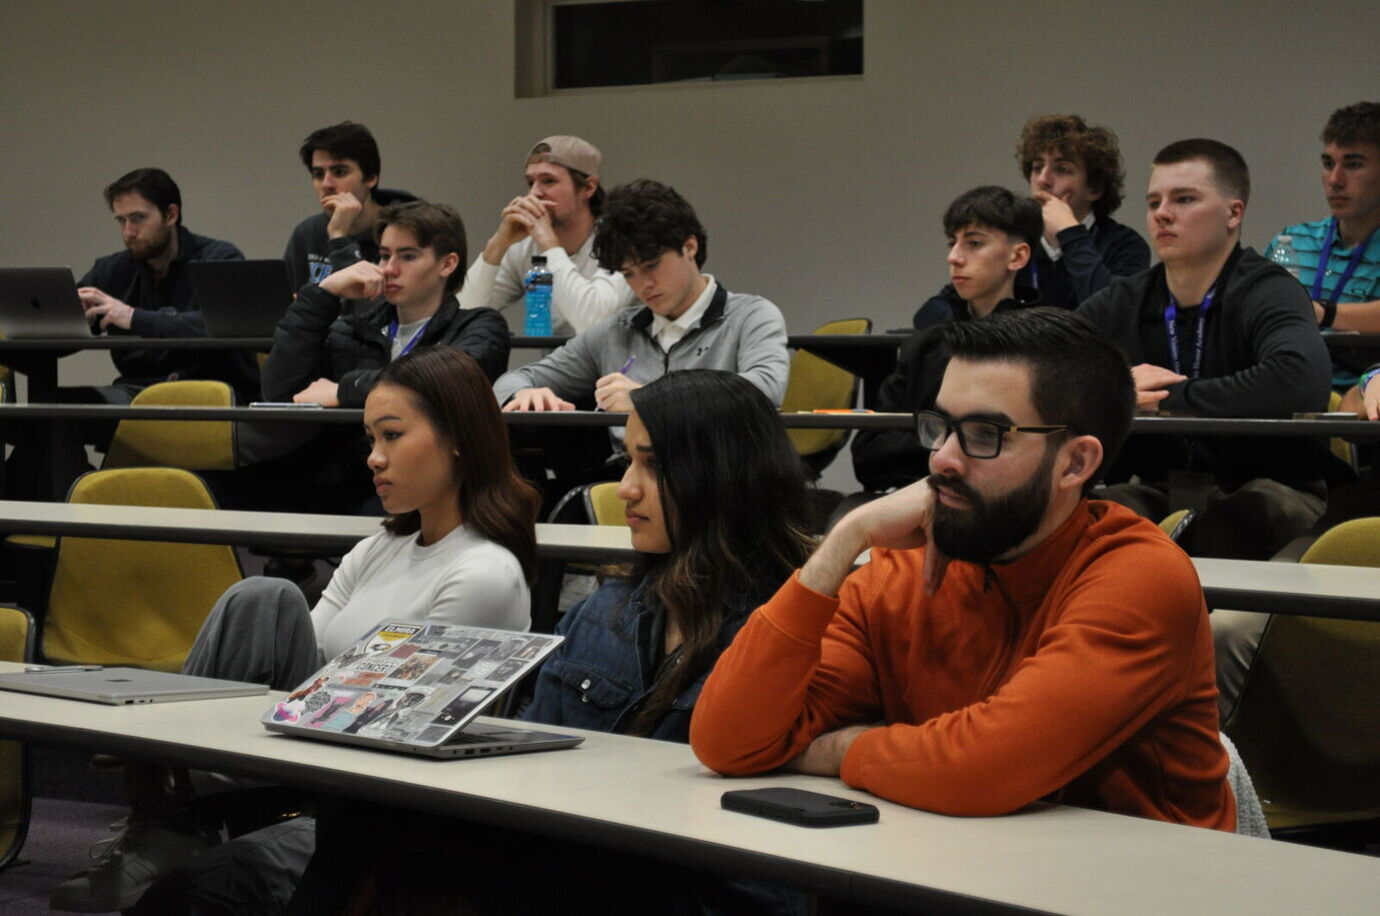 Students listen to a presenter in a lecture hall